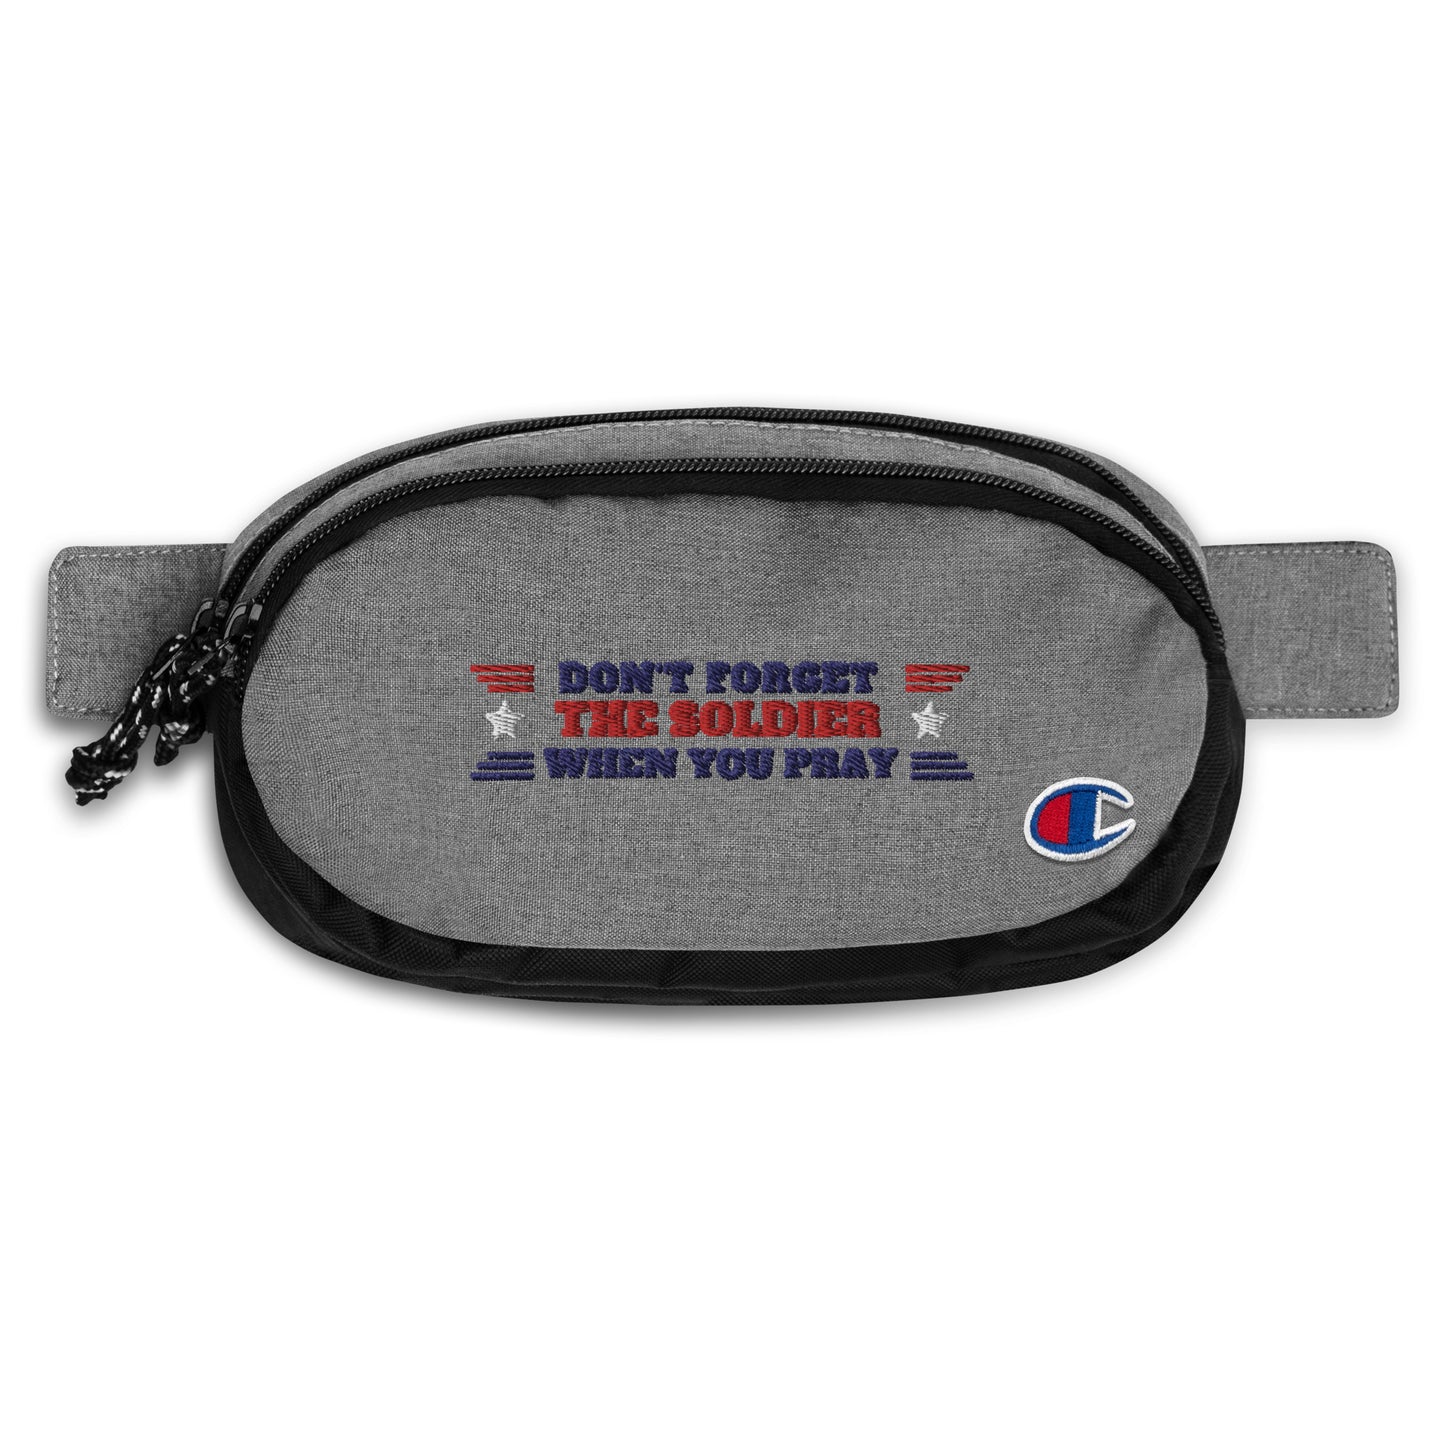 "The Soldier" Champion Fanny Pack